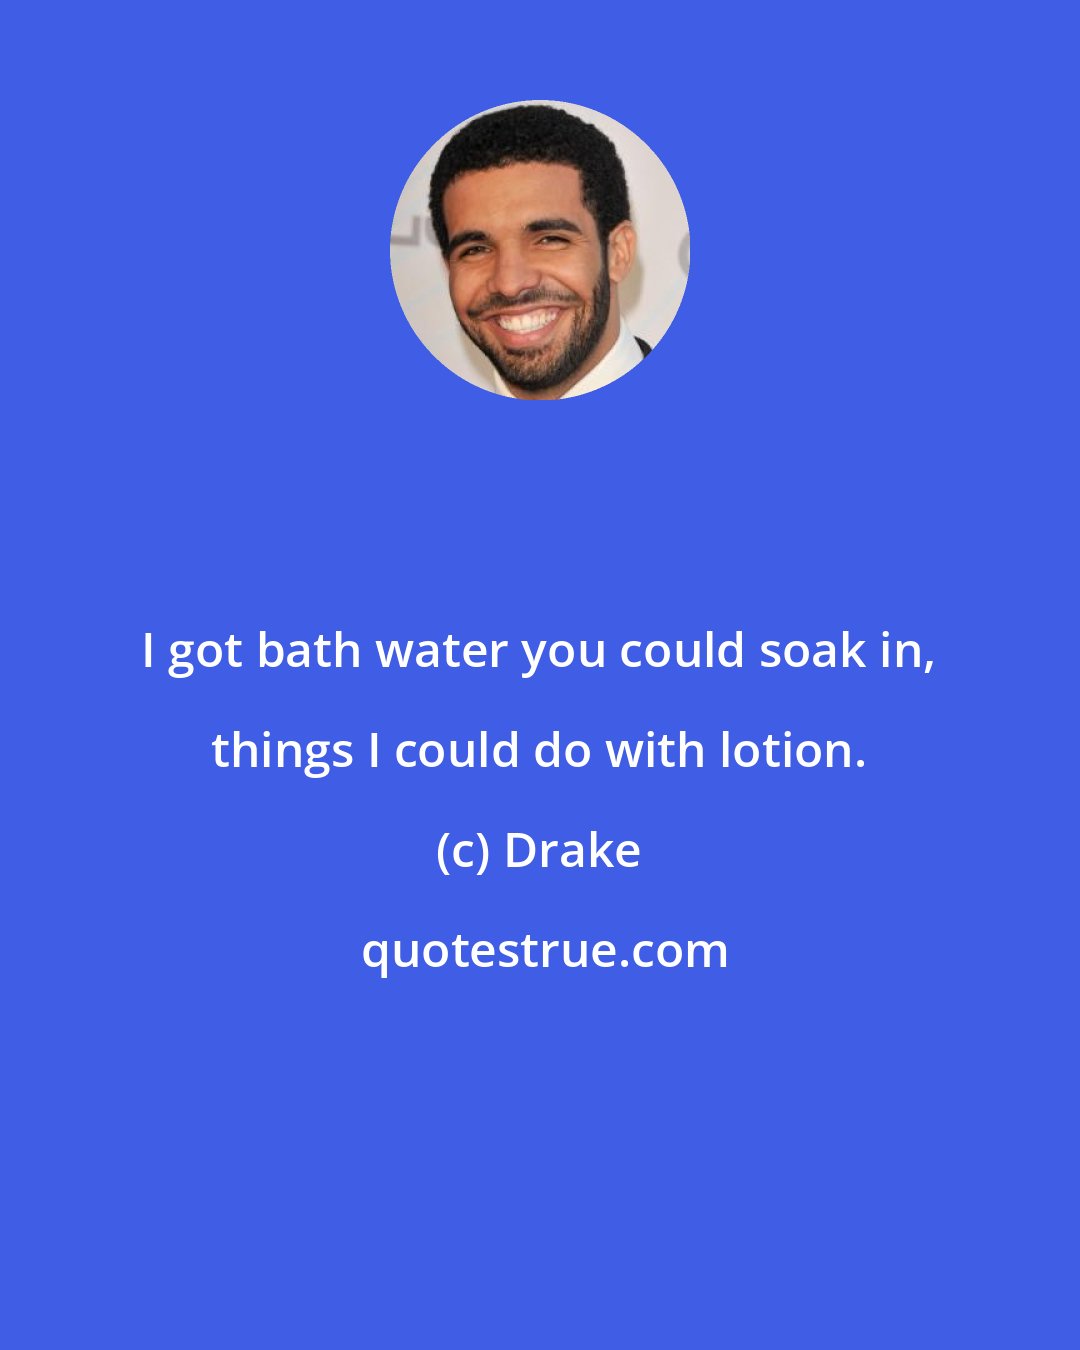 Drake: I got bath water you could soak in, things I could do with lotion.